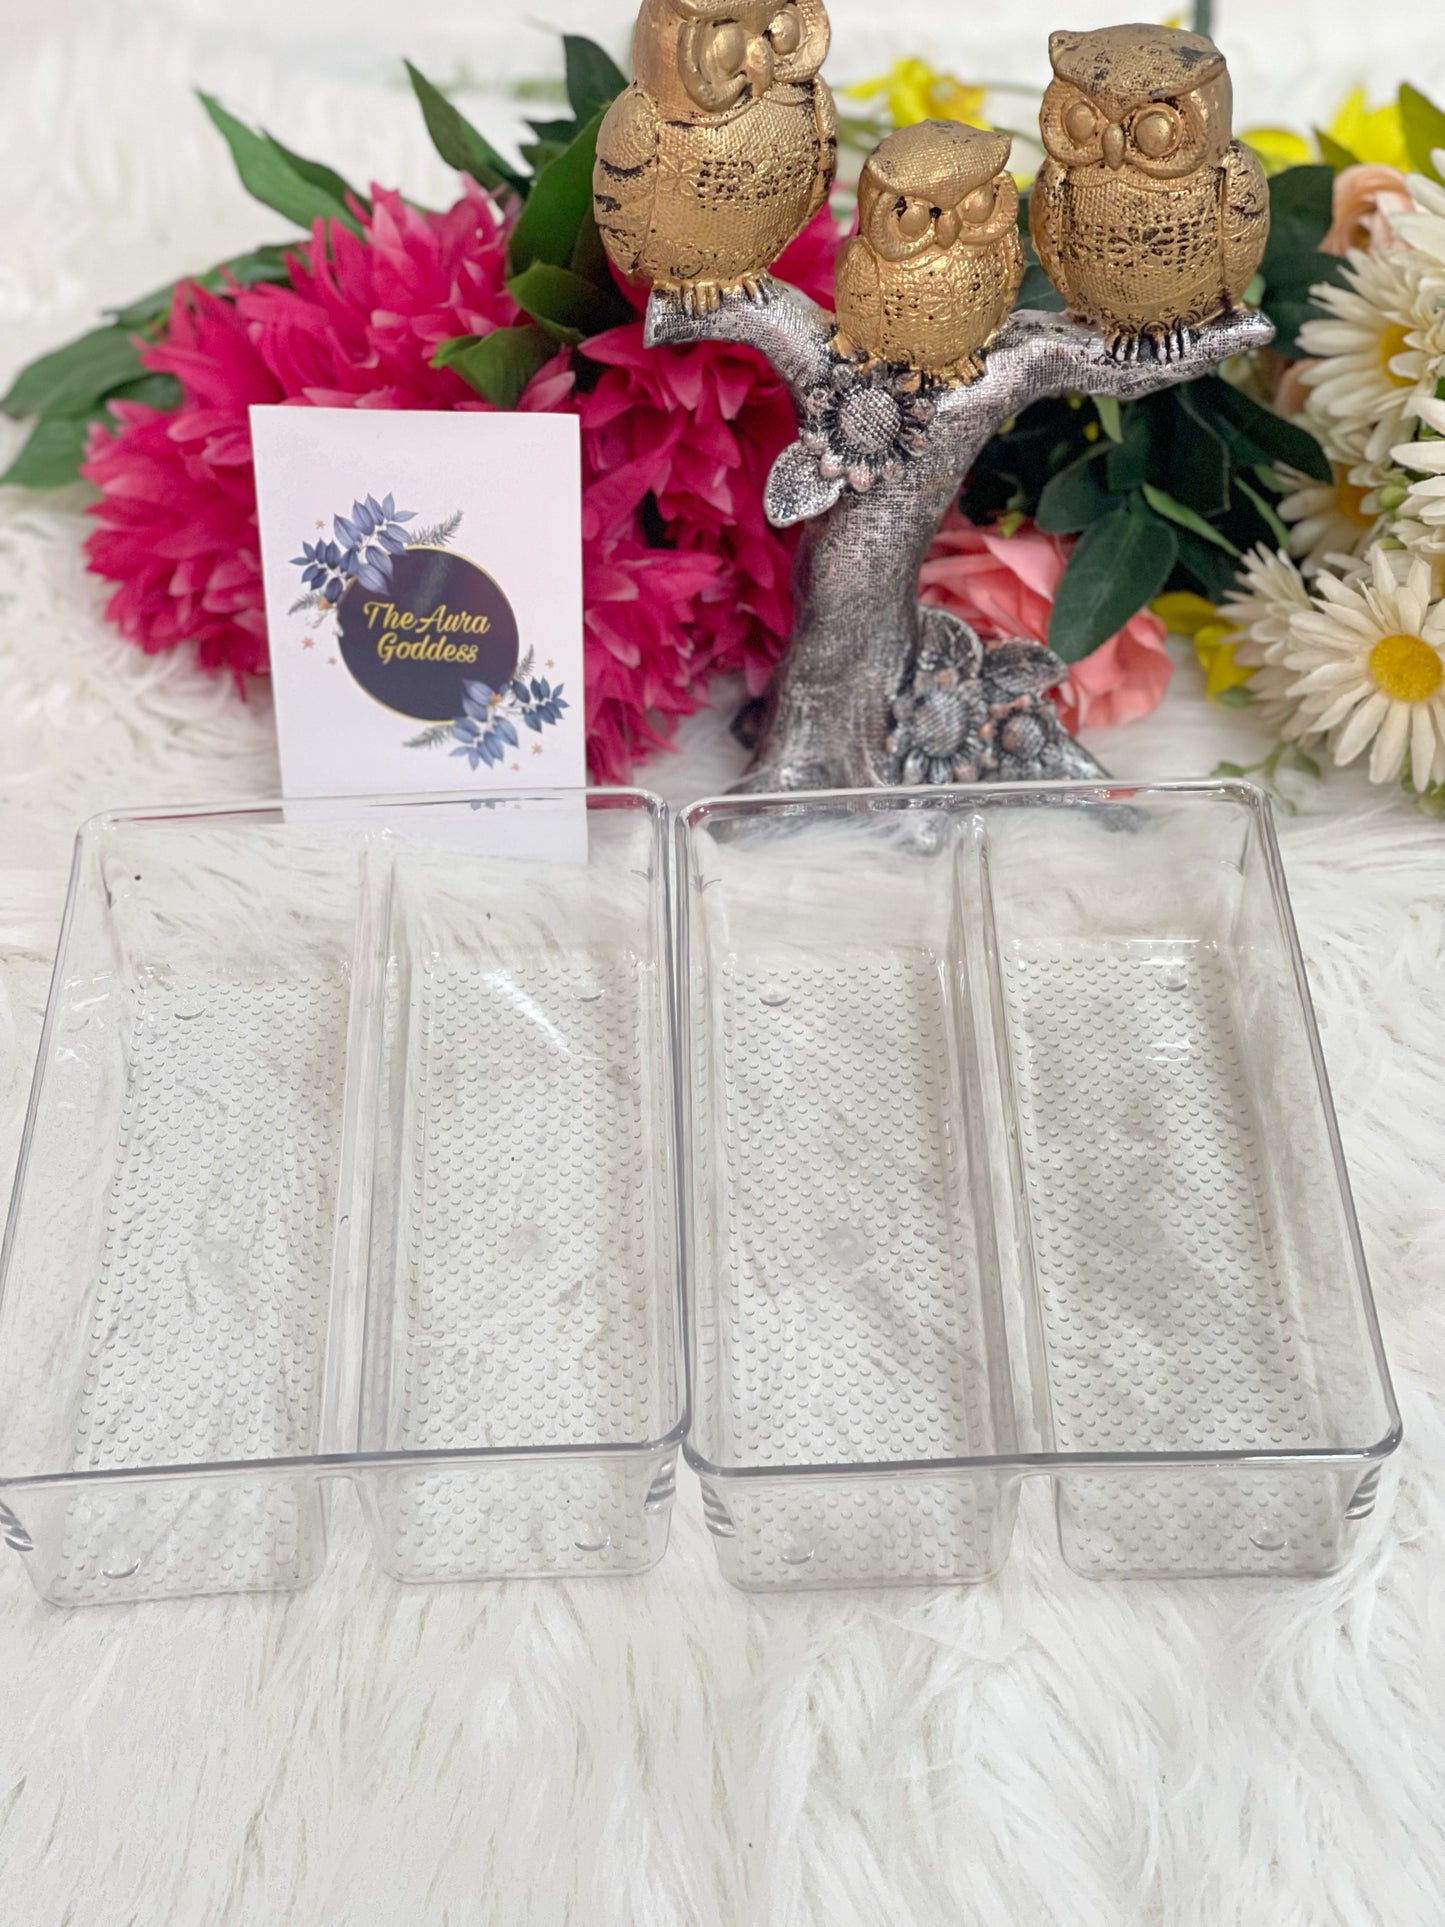 Acrylic drawer organiser set of 3 different sizes